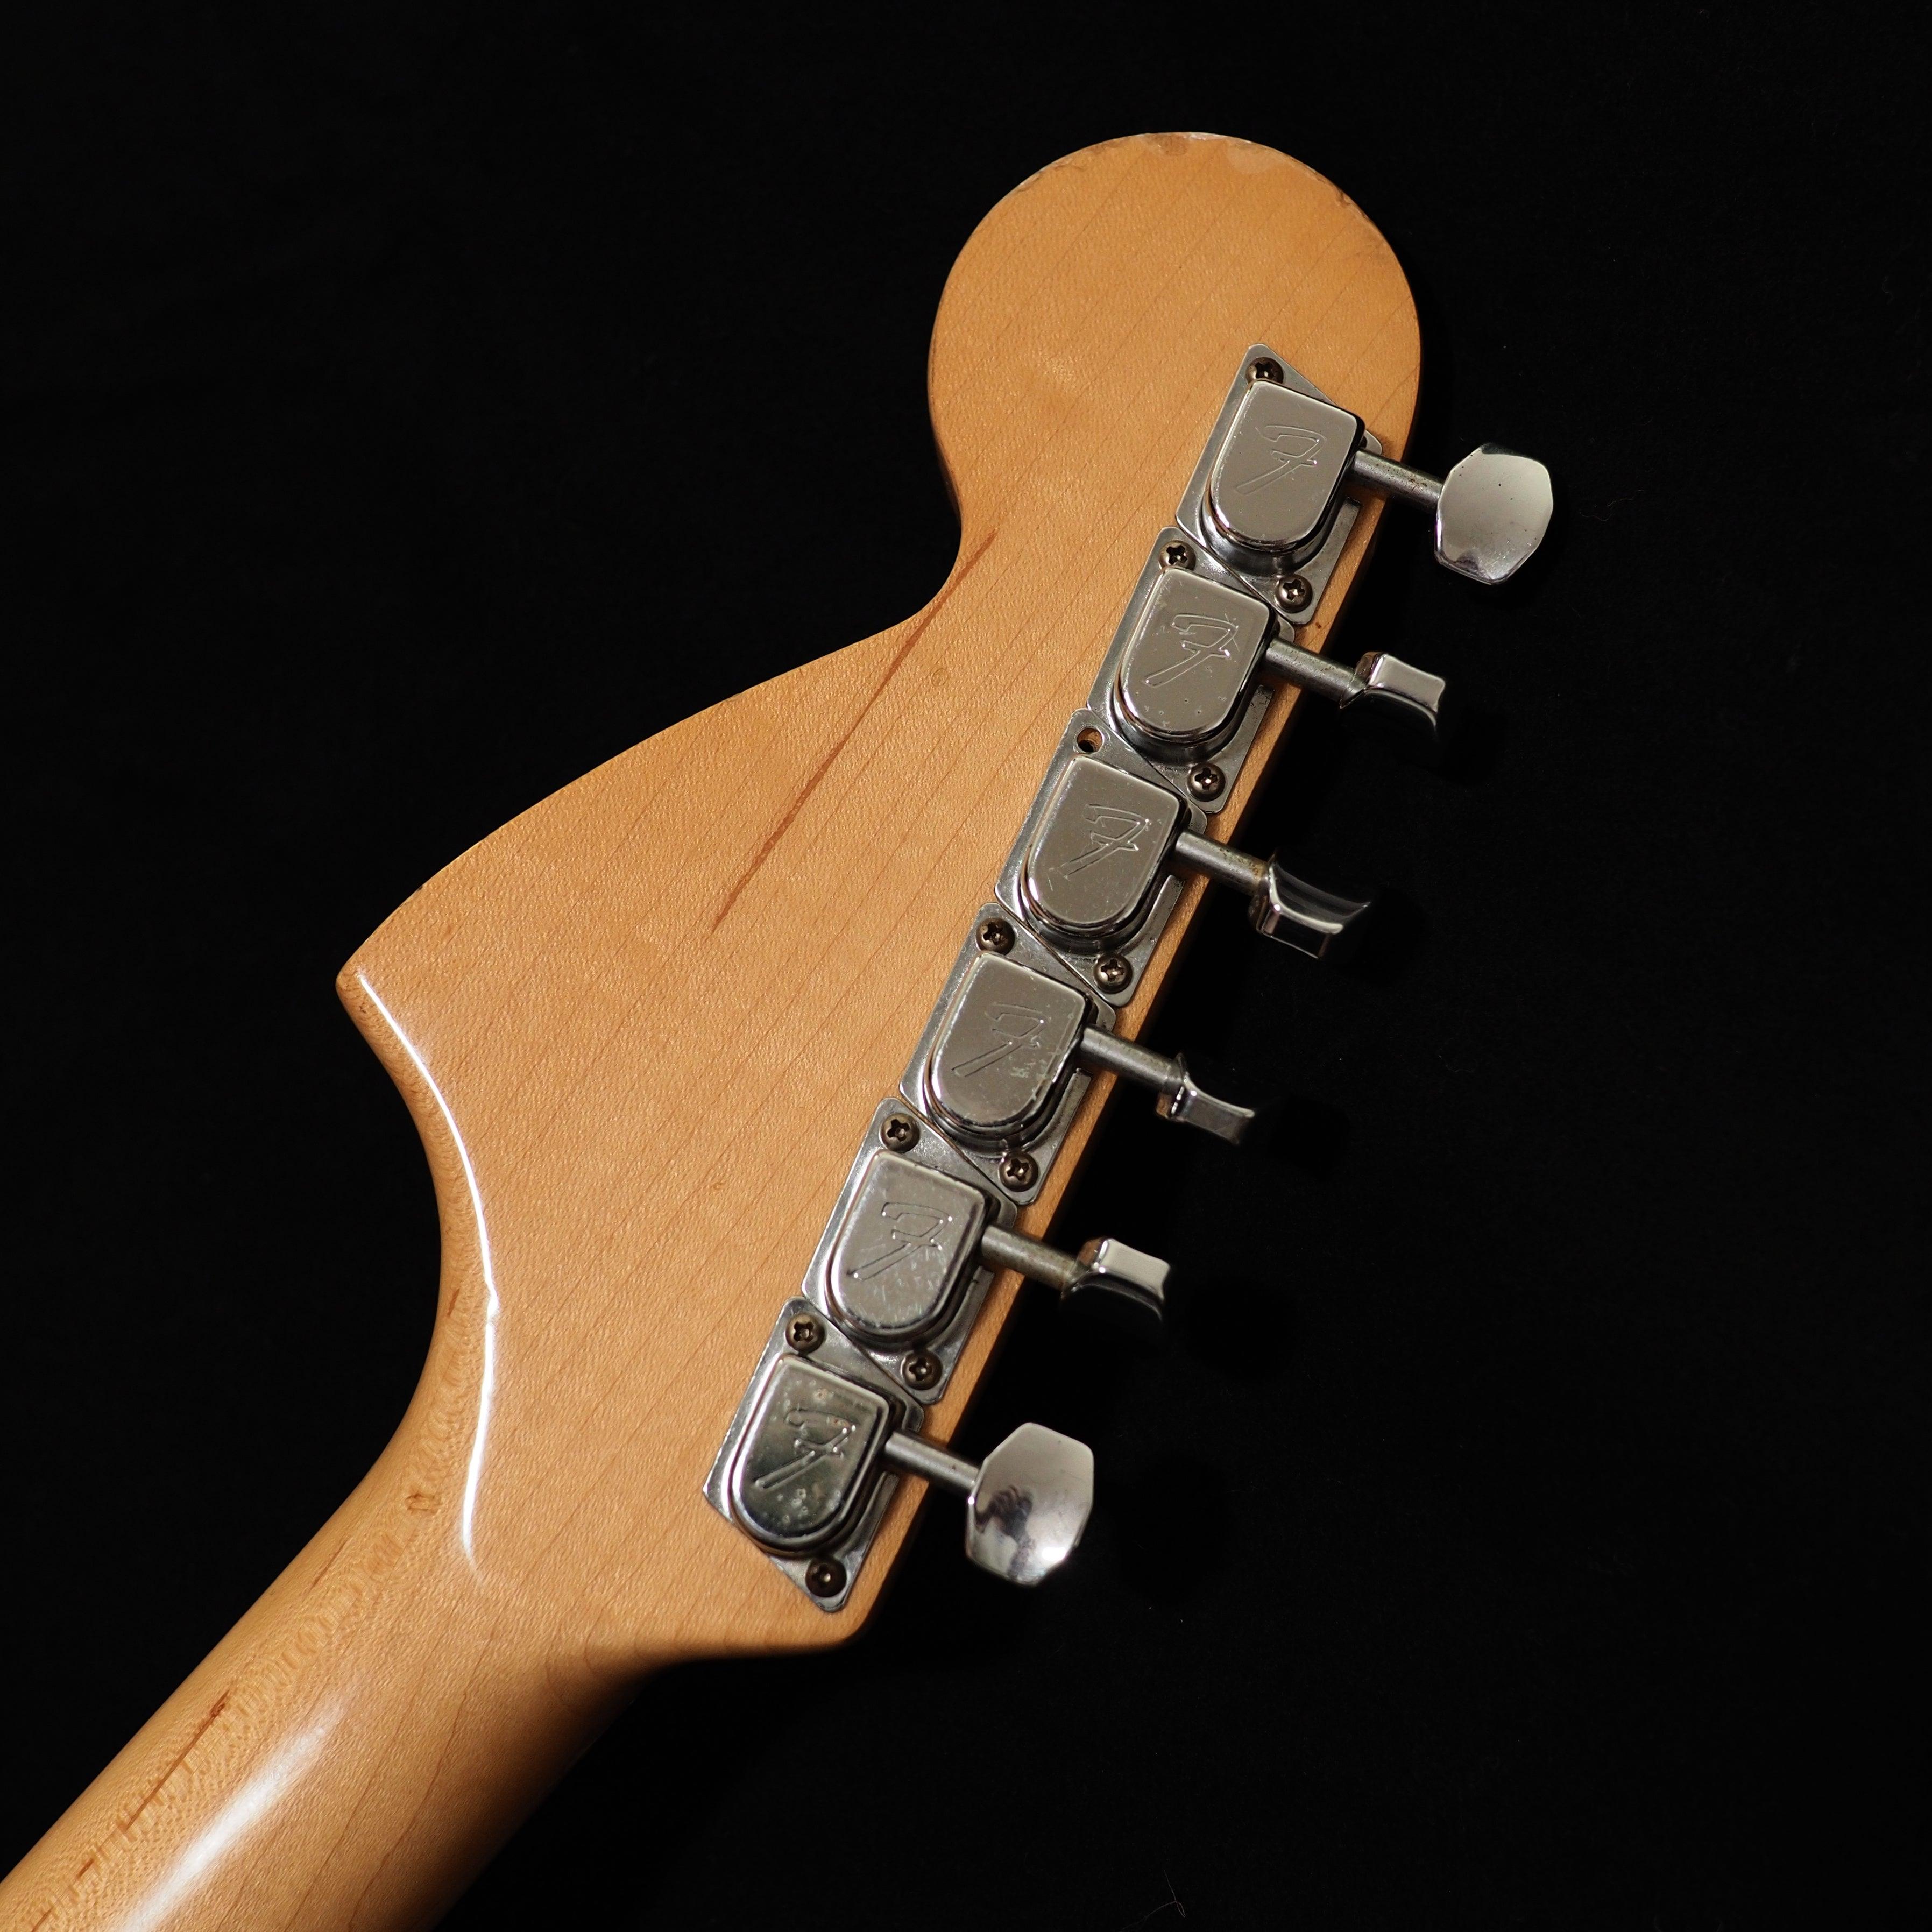 Fender Mustang from 1978 in natural Ash – wurst.guitars